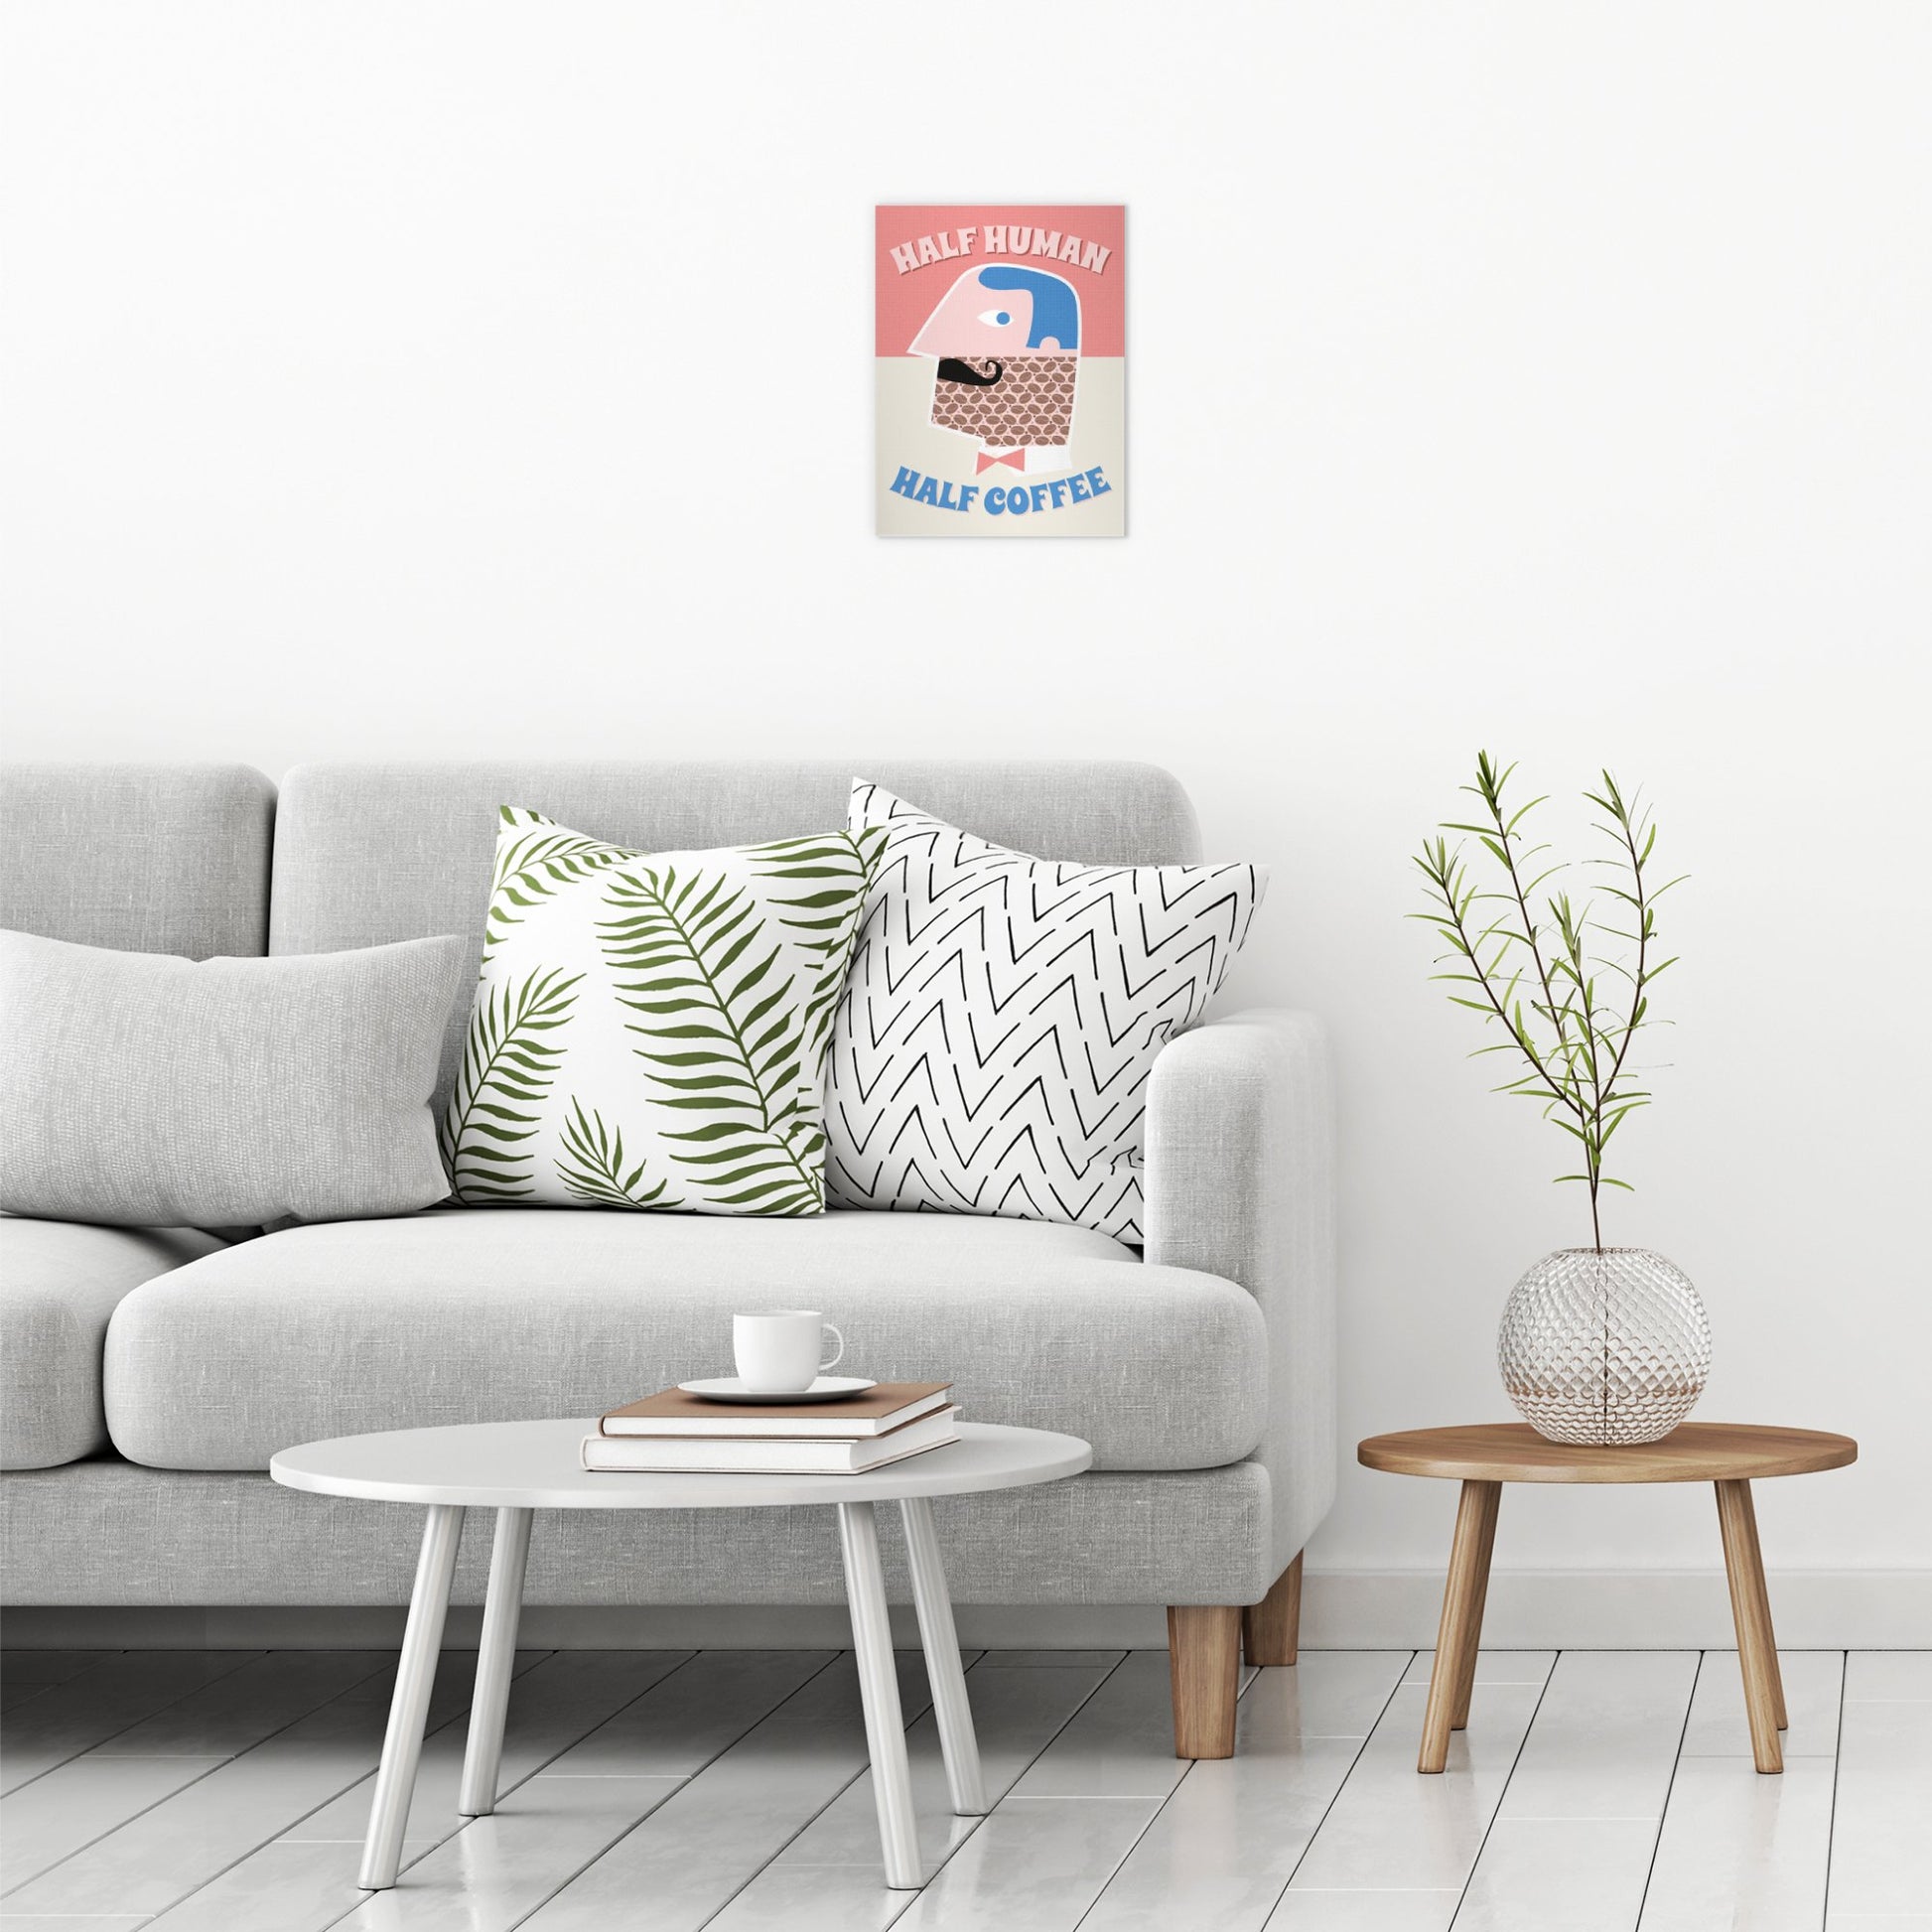 A contemporary modern room view showing a small size metal art poster display plate with printed design of a Half Human Half Coffee' Fun Retro Quote